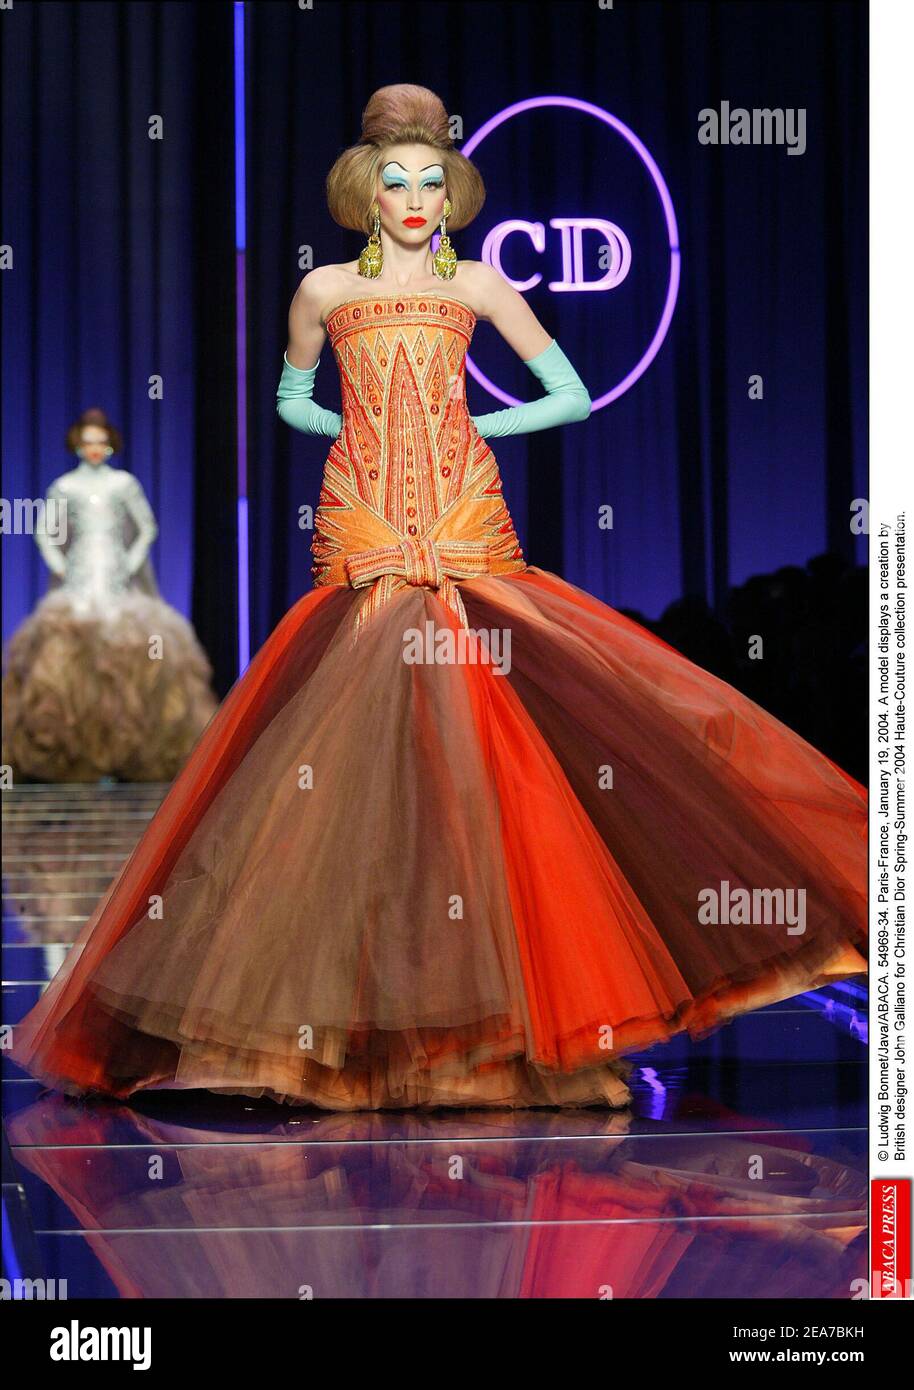 Ludwig Bonnet/Java/ABACA. 54969-34. Paris-France, January 19, 2004. A model  displays a creation by British designer John Galliano for Christian Dior  Spring-Summer 2004 Haute-Couture collection presentation Stock Photo - Alamy